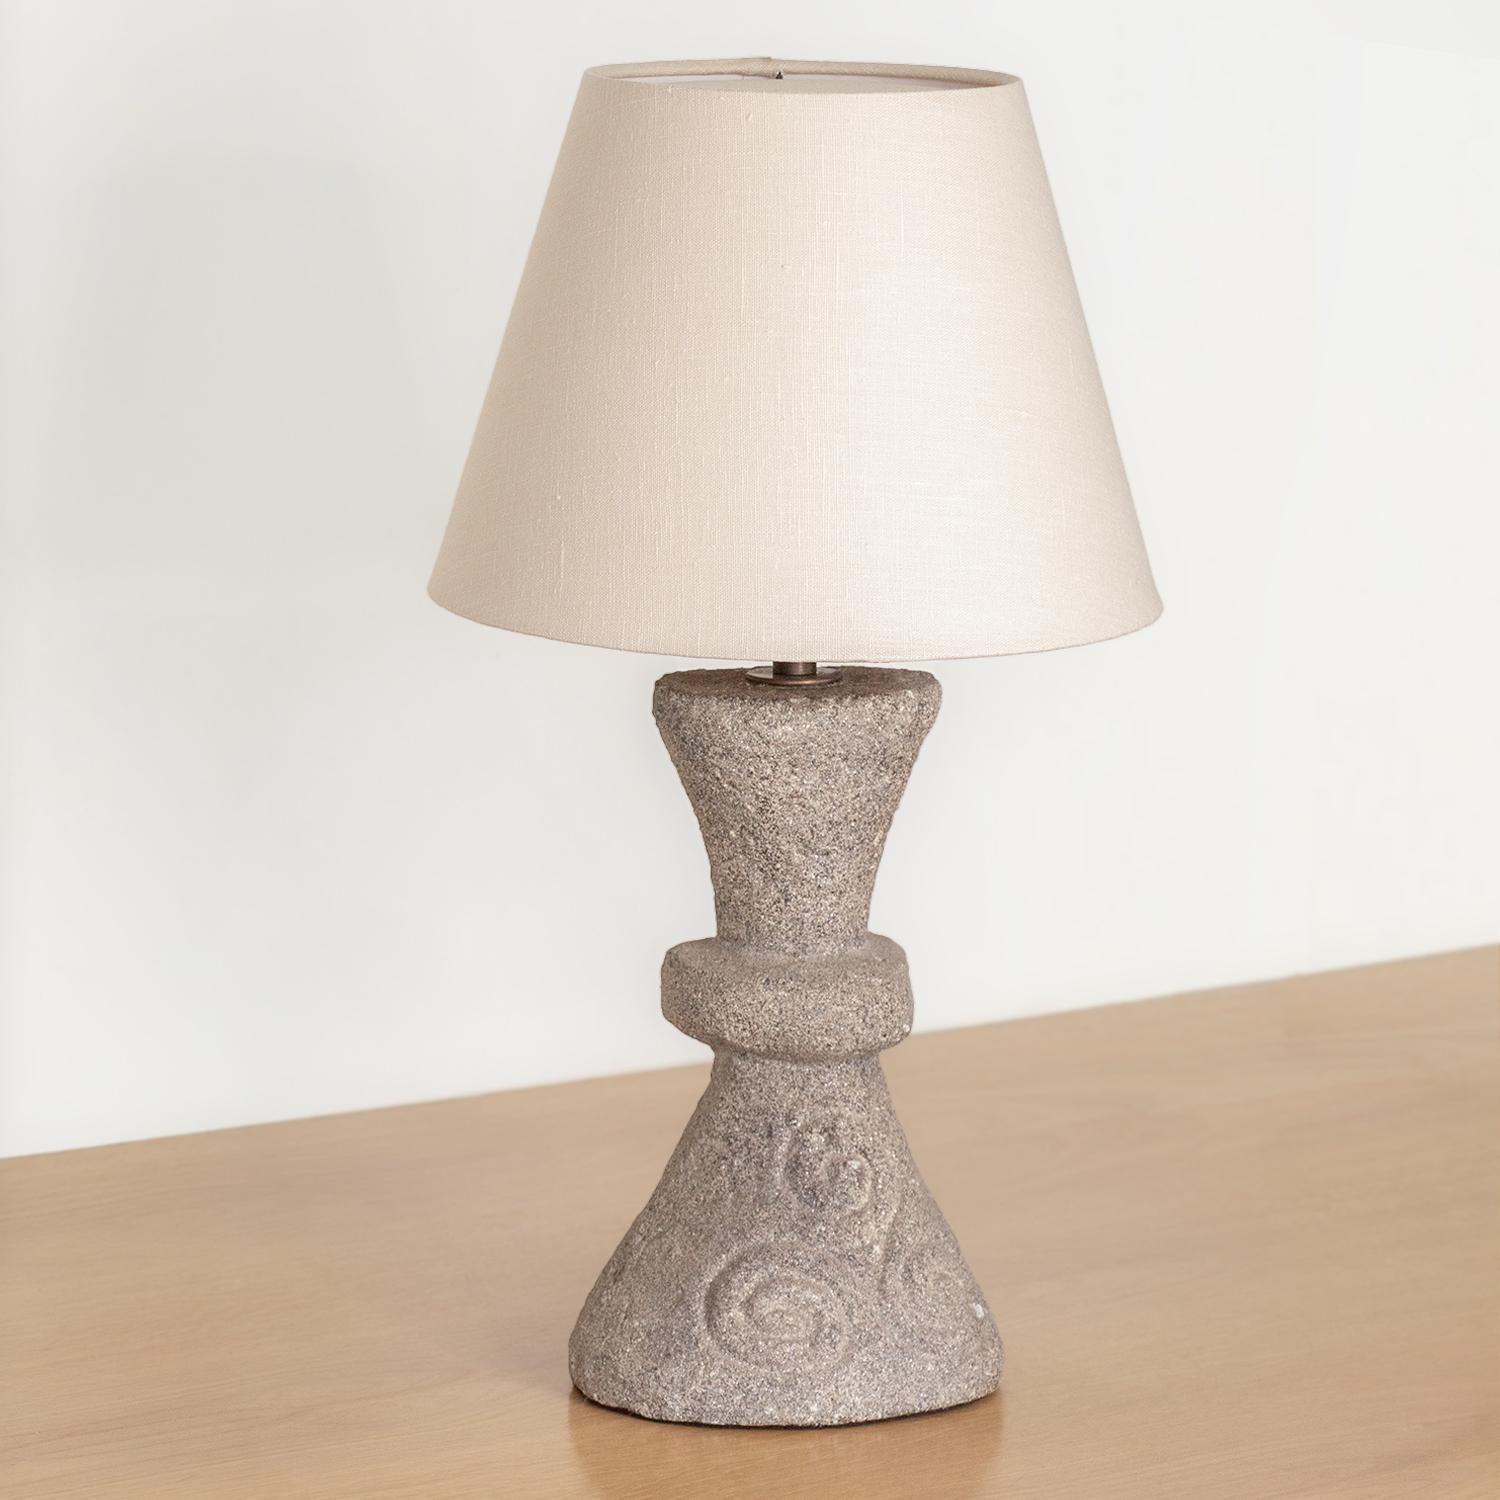 Vintage French cement table lamp with hand carved angular base with spiral detail in stone. New off-white tapered linen shade and newly re-wired.

Measures: 
Base - 7.5 W